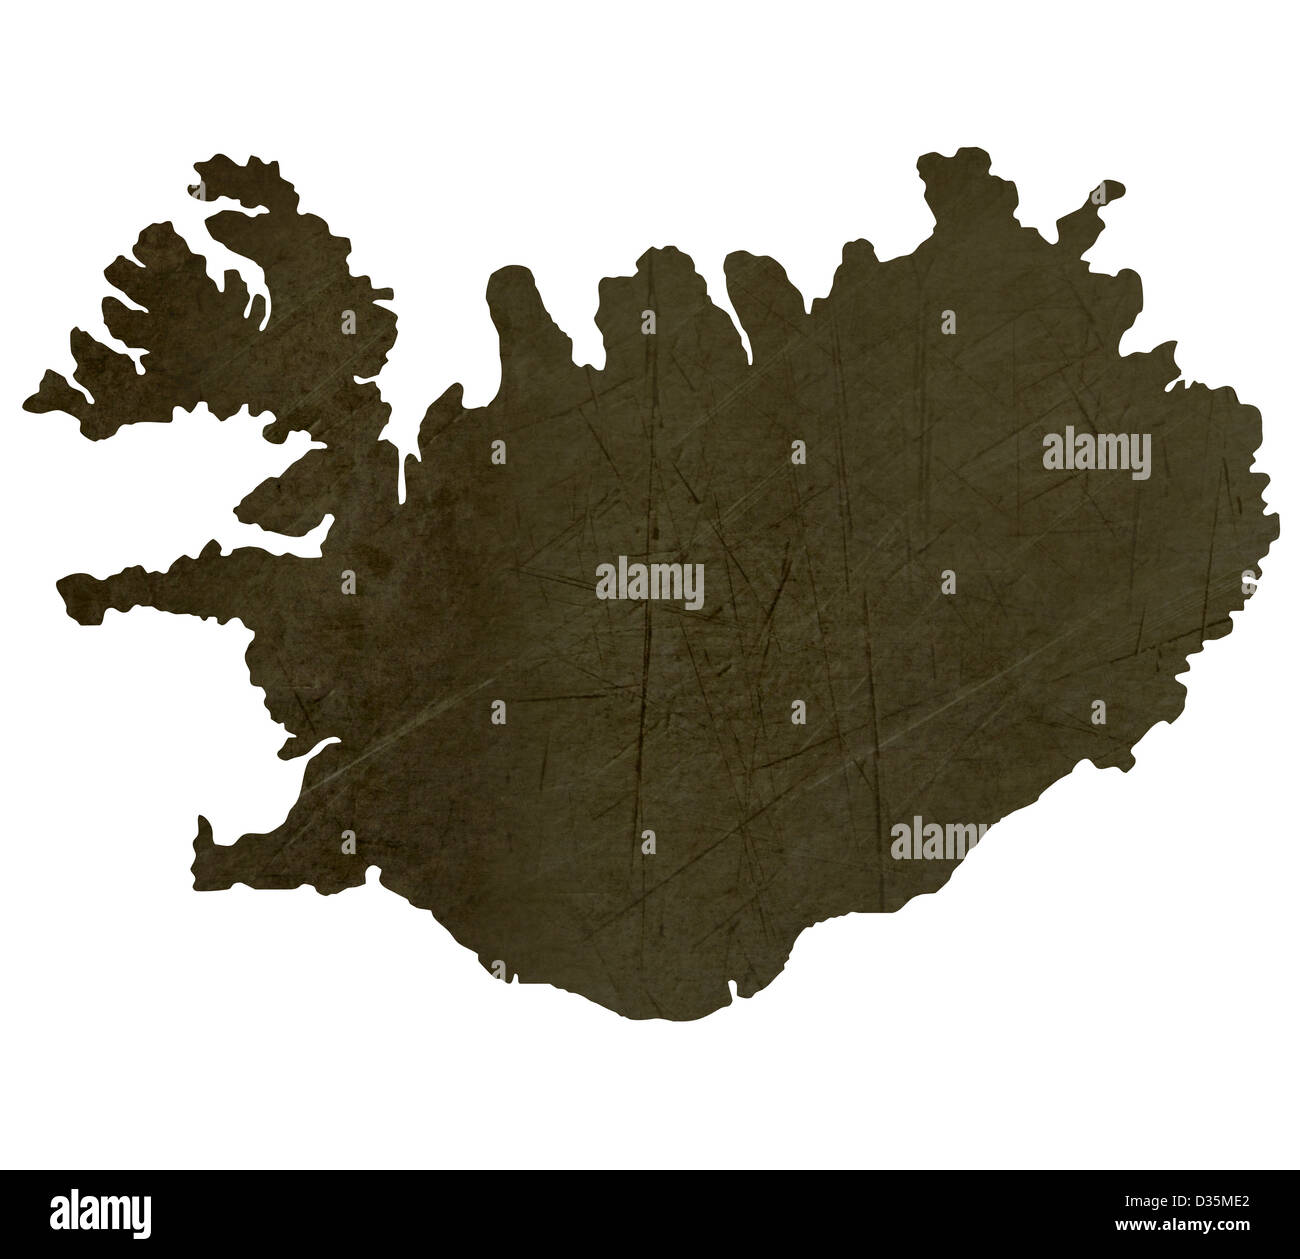 Dark silhouetted and textured map of Iceland isolated on white background. Stock Photo